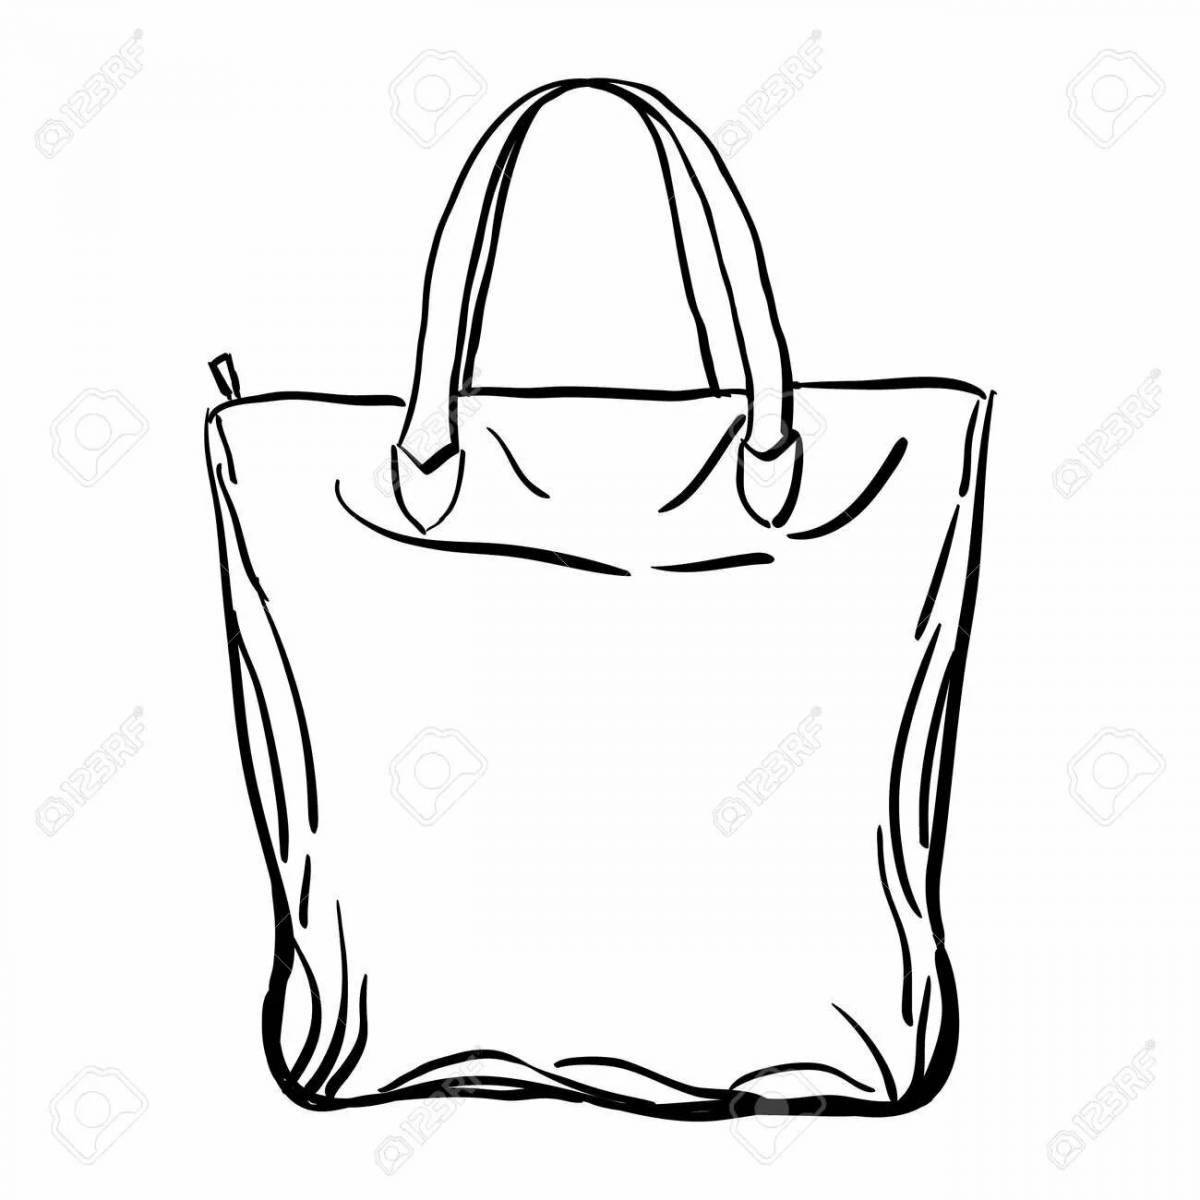 Coloring page sunny shopper